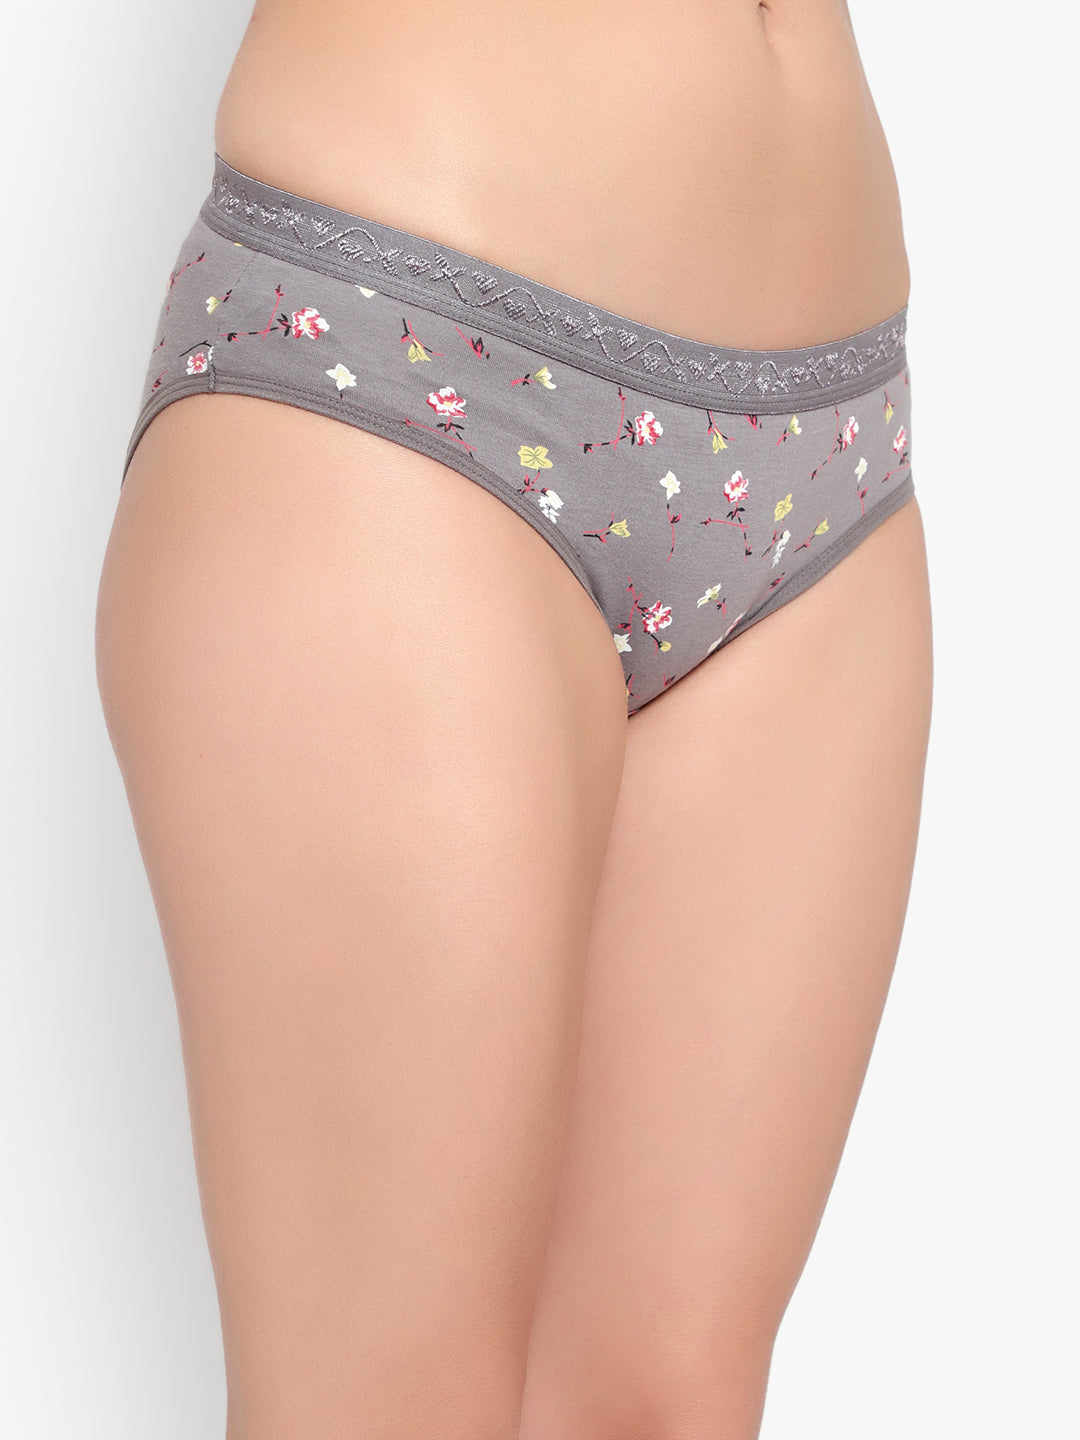 Bruchi Club Women Grey Floral Printed Cotton Low Waist Hipster Panty